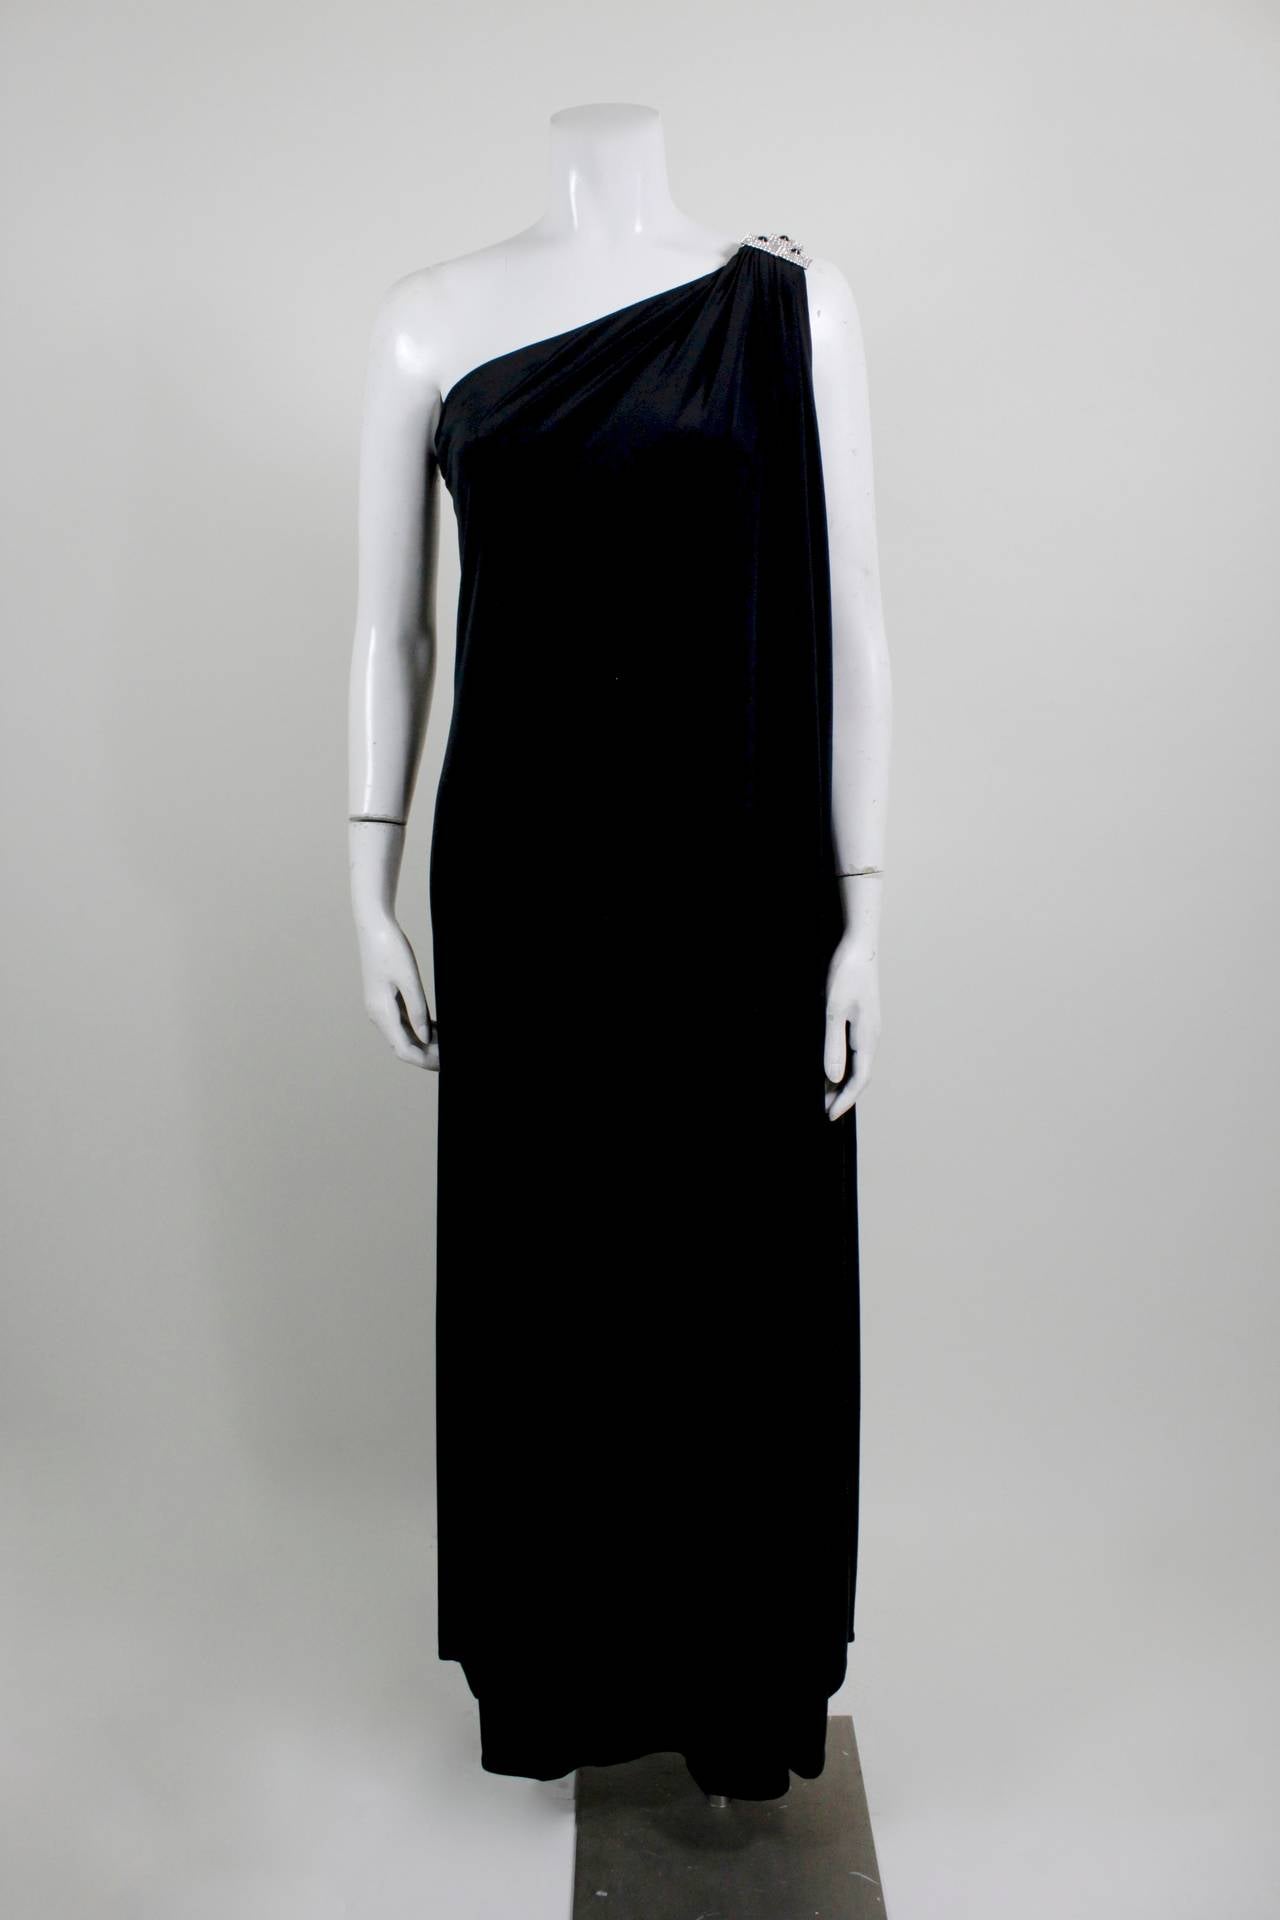 Black Adele Simpson Jersey Asymmetrical Evening Gown with Jeweled Shoulder